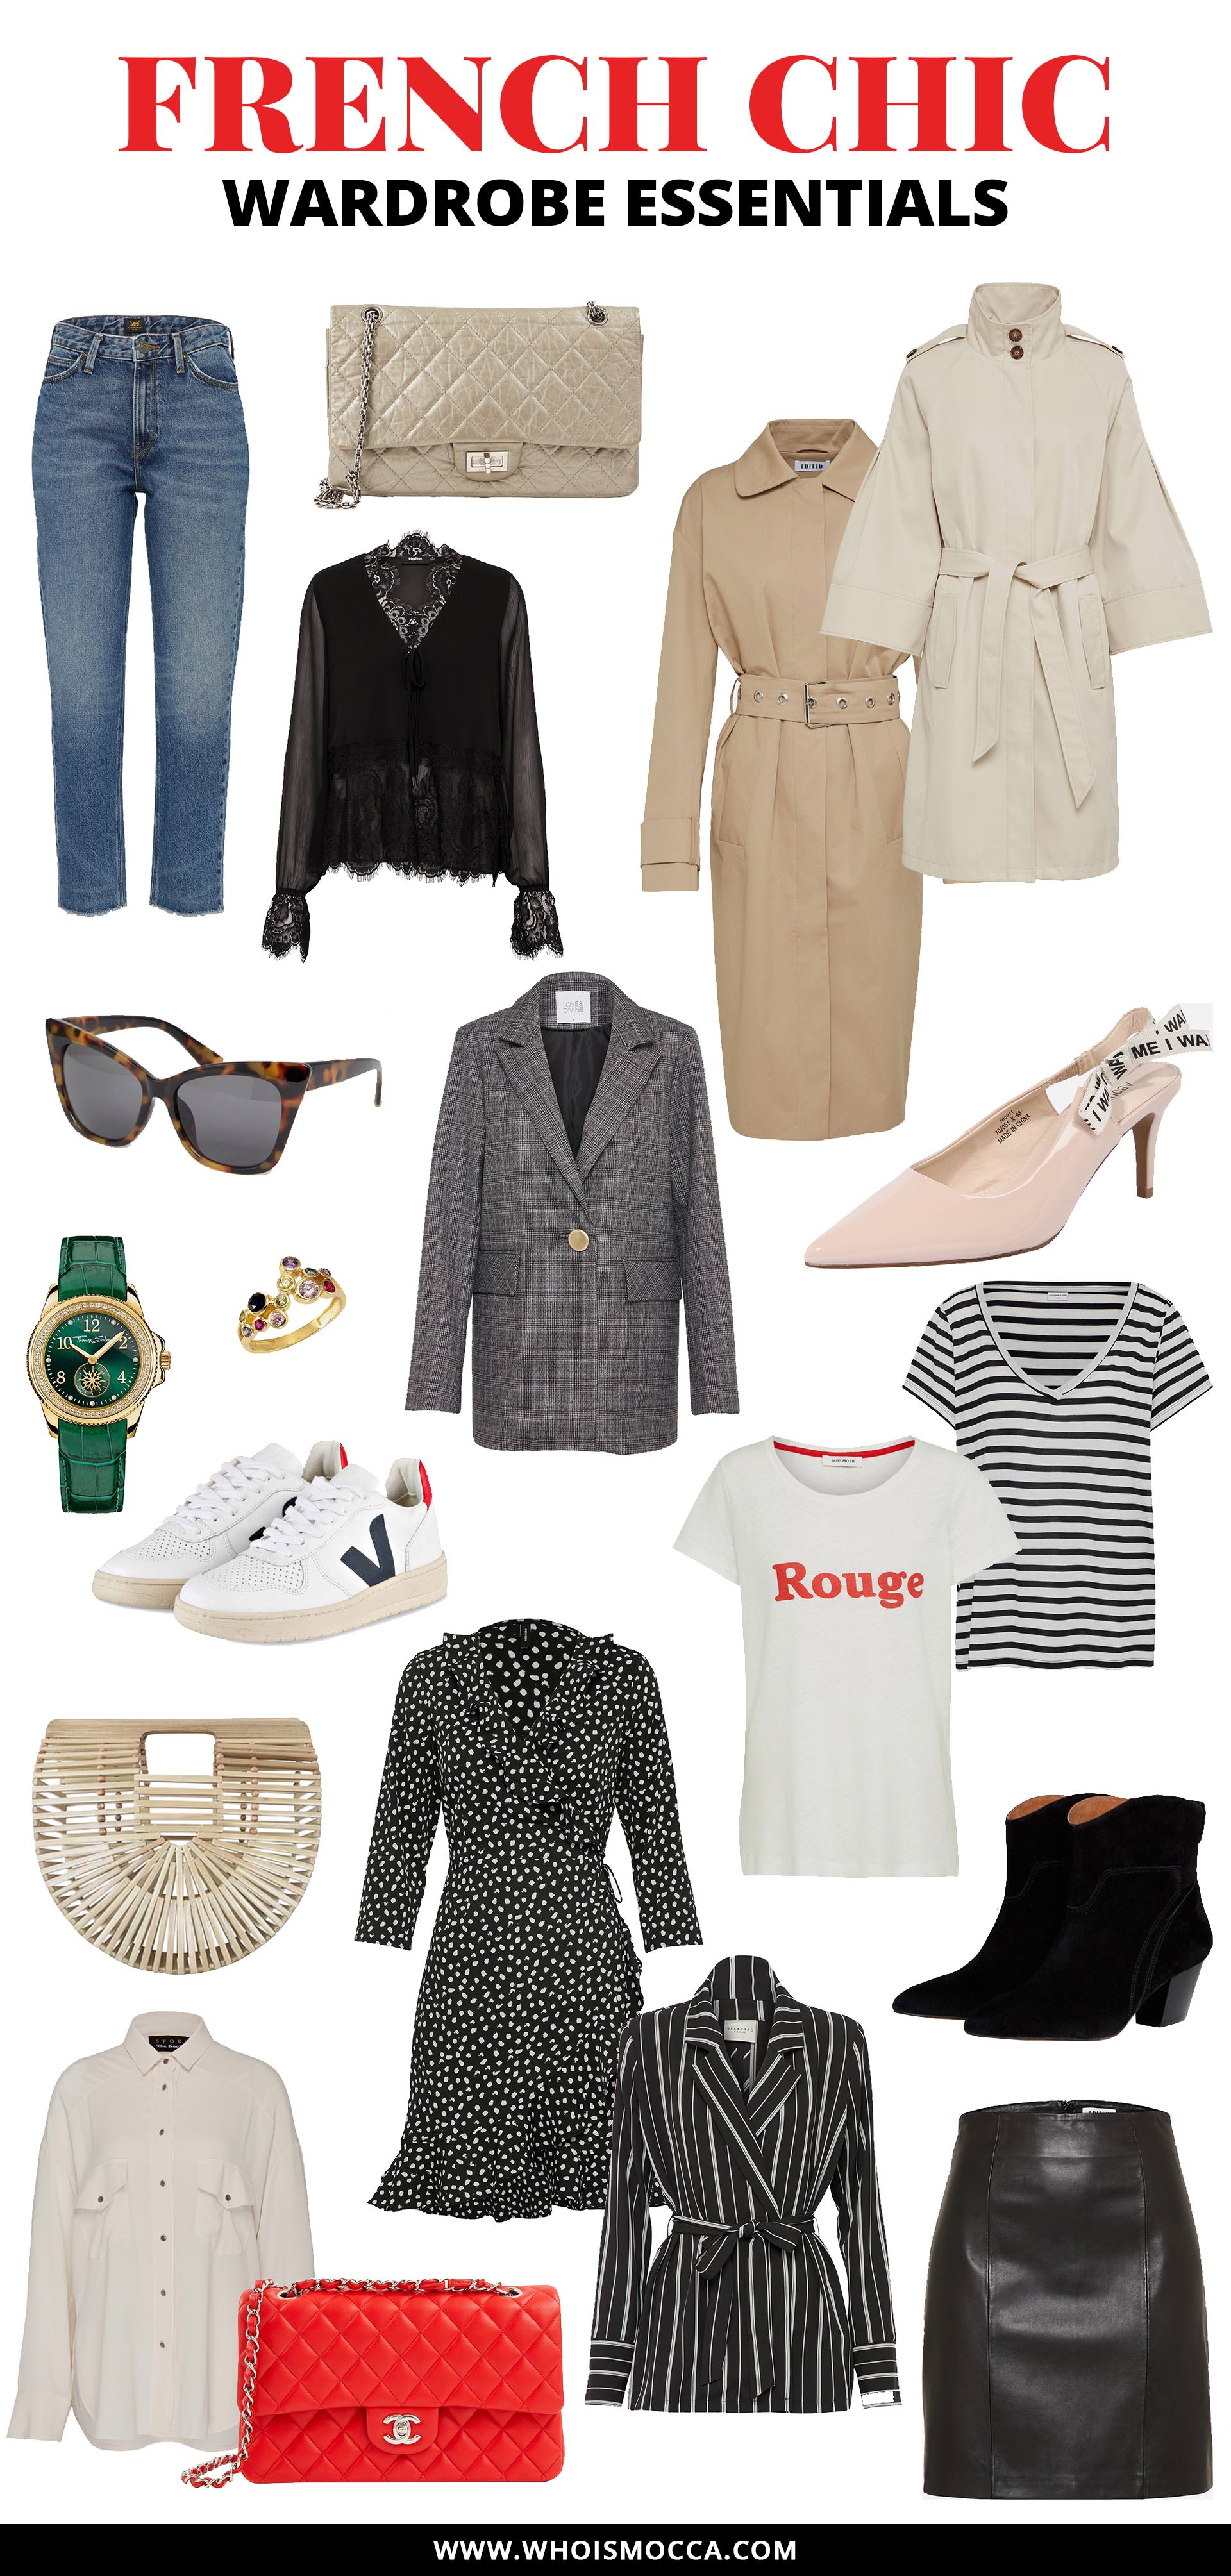 French Chic Capsule Wardrobe Essentials, französische Mode, Parisian Style Tipps, French Chic Outfits, Online Shops für französische Mode, Mode Tipps, Style Guide, www.whoismocca.com